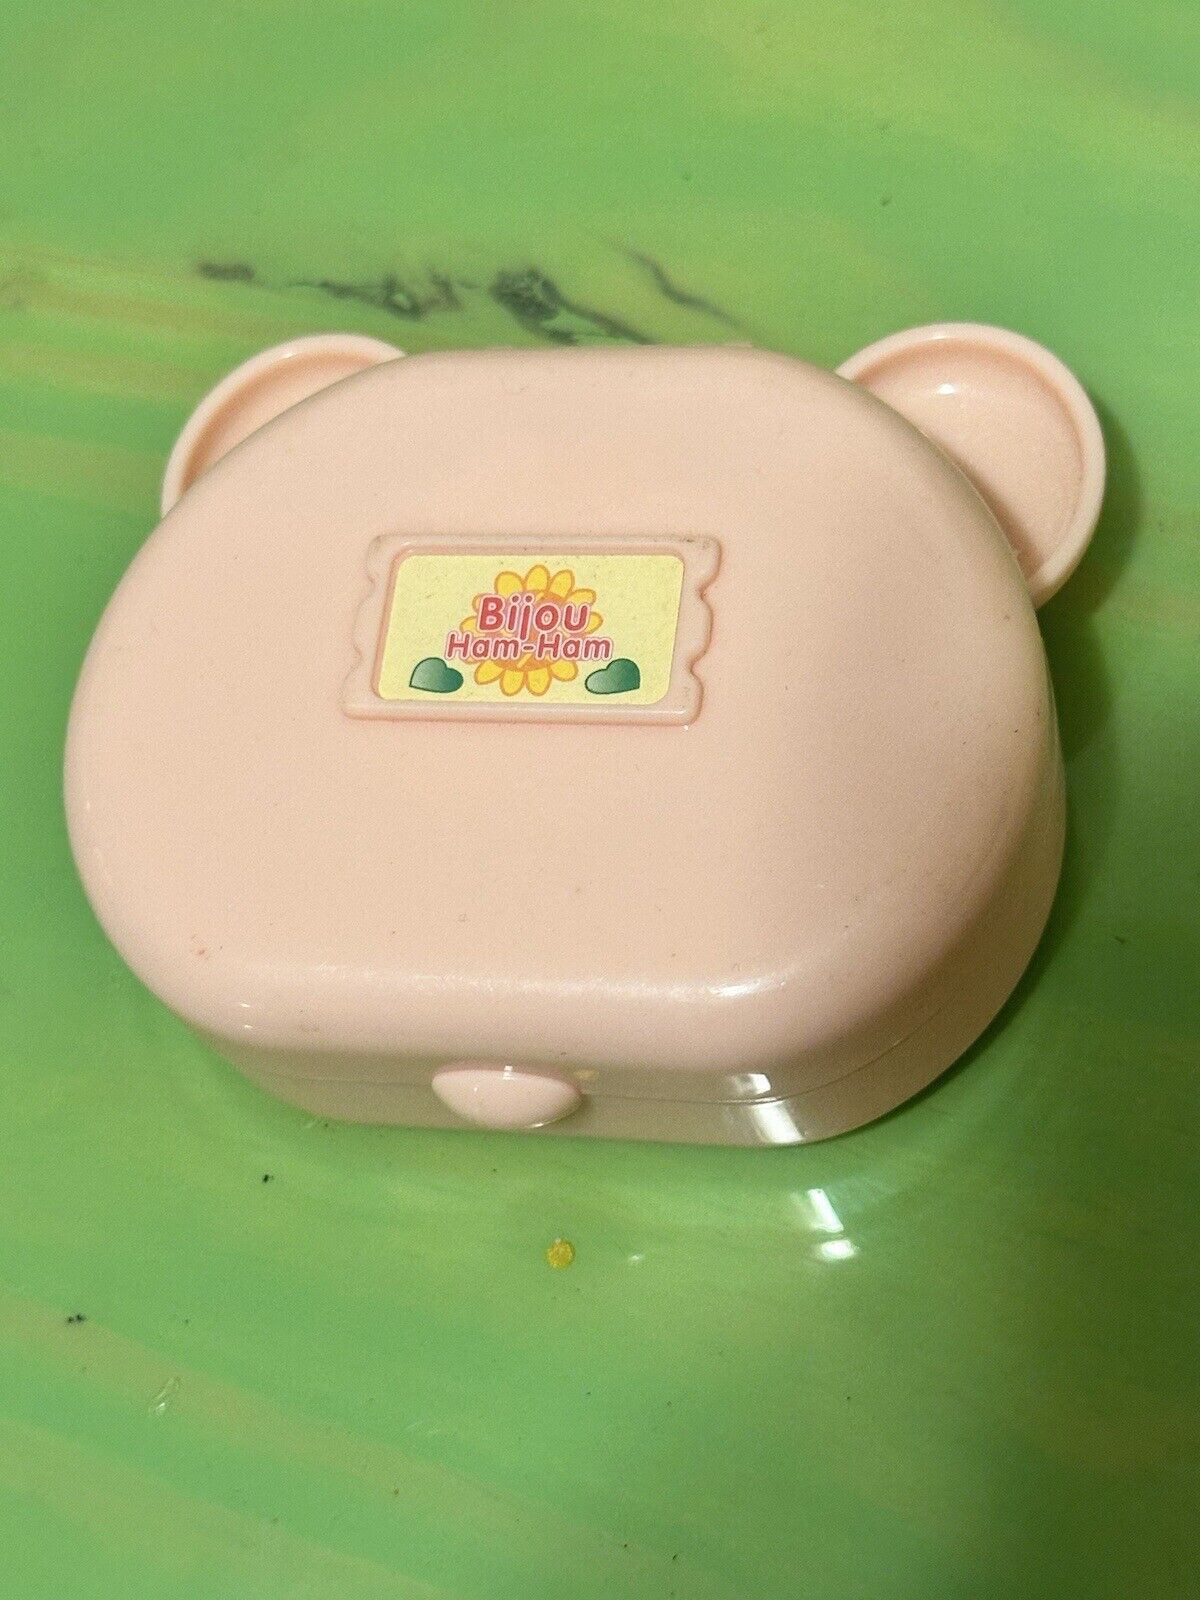 Hamtaro Bijou Vintage Miniature Play Compact Epoch — Compact & Accessories ONLY